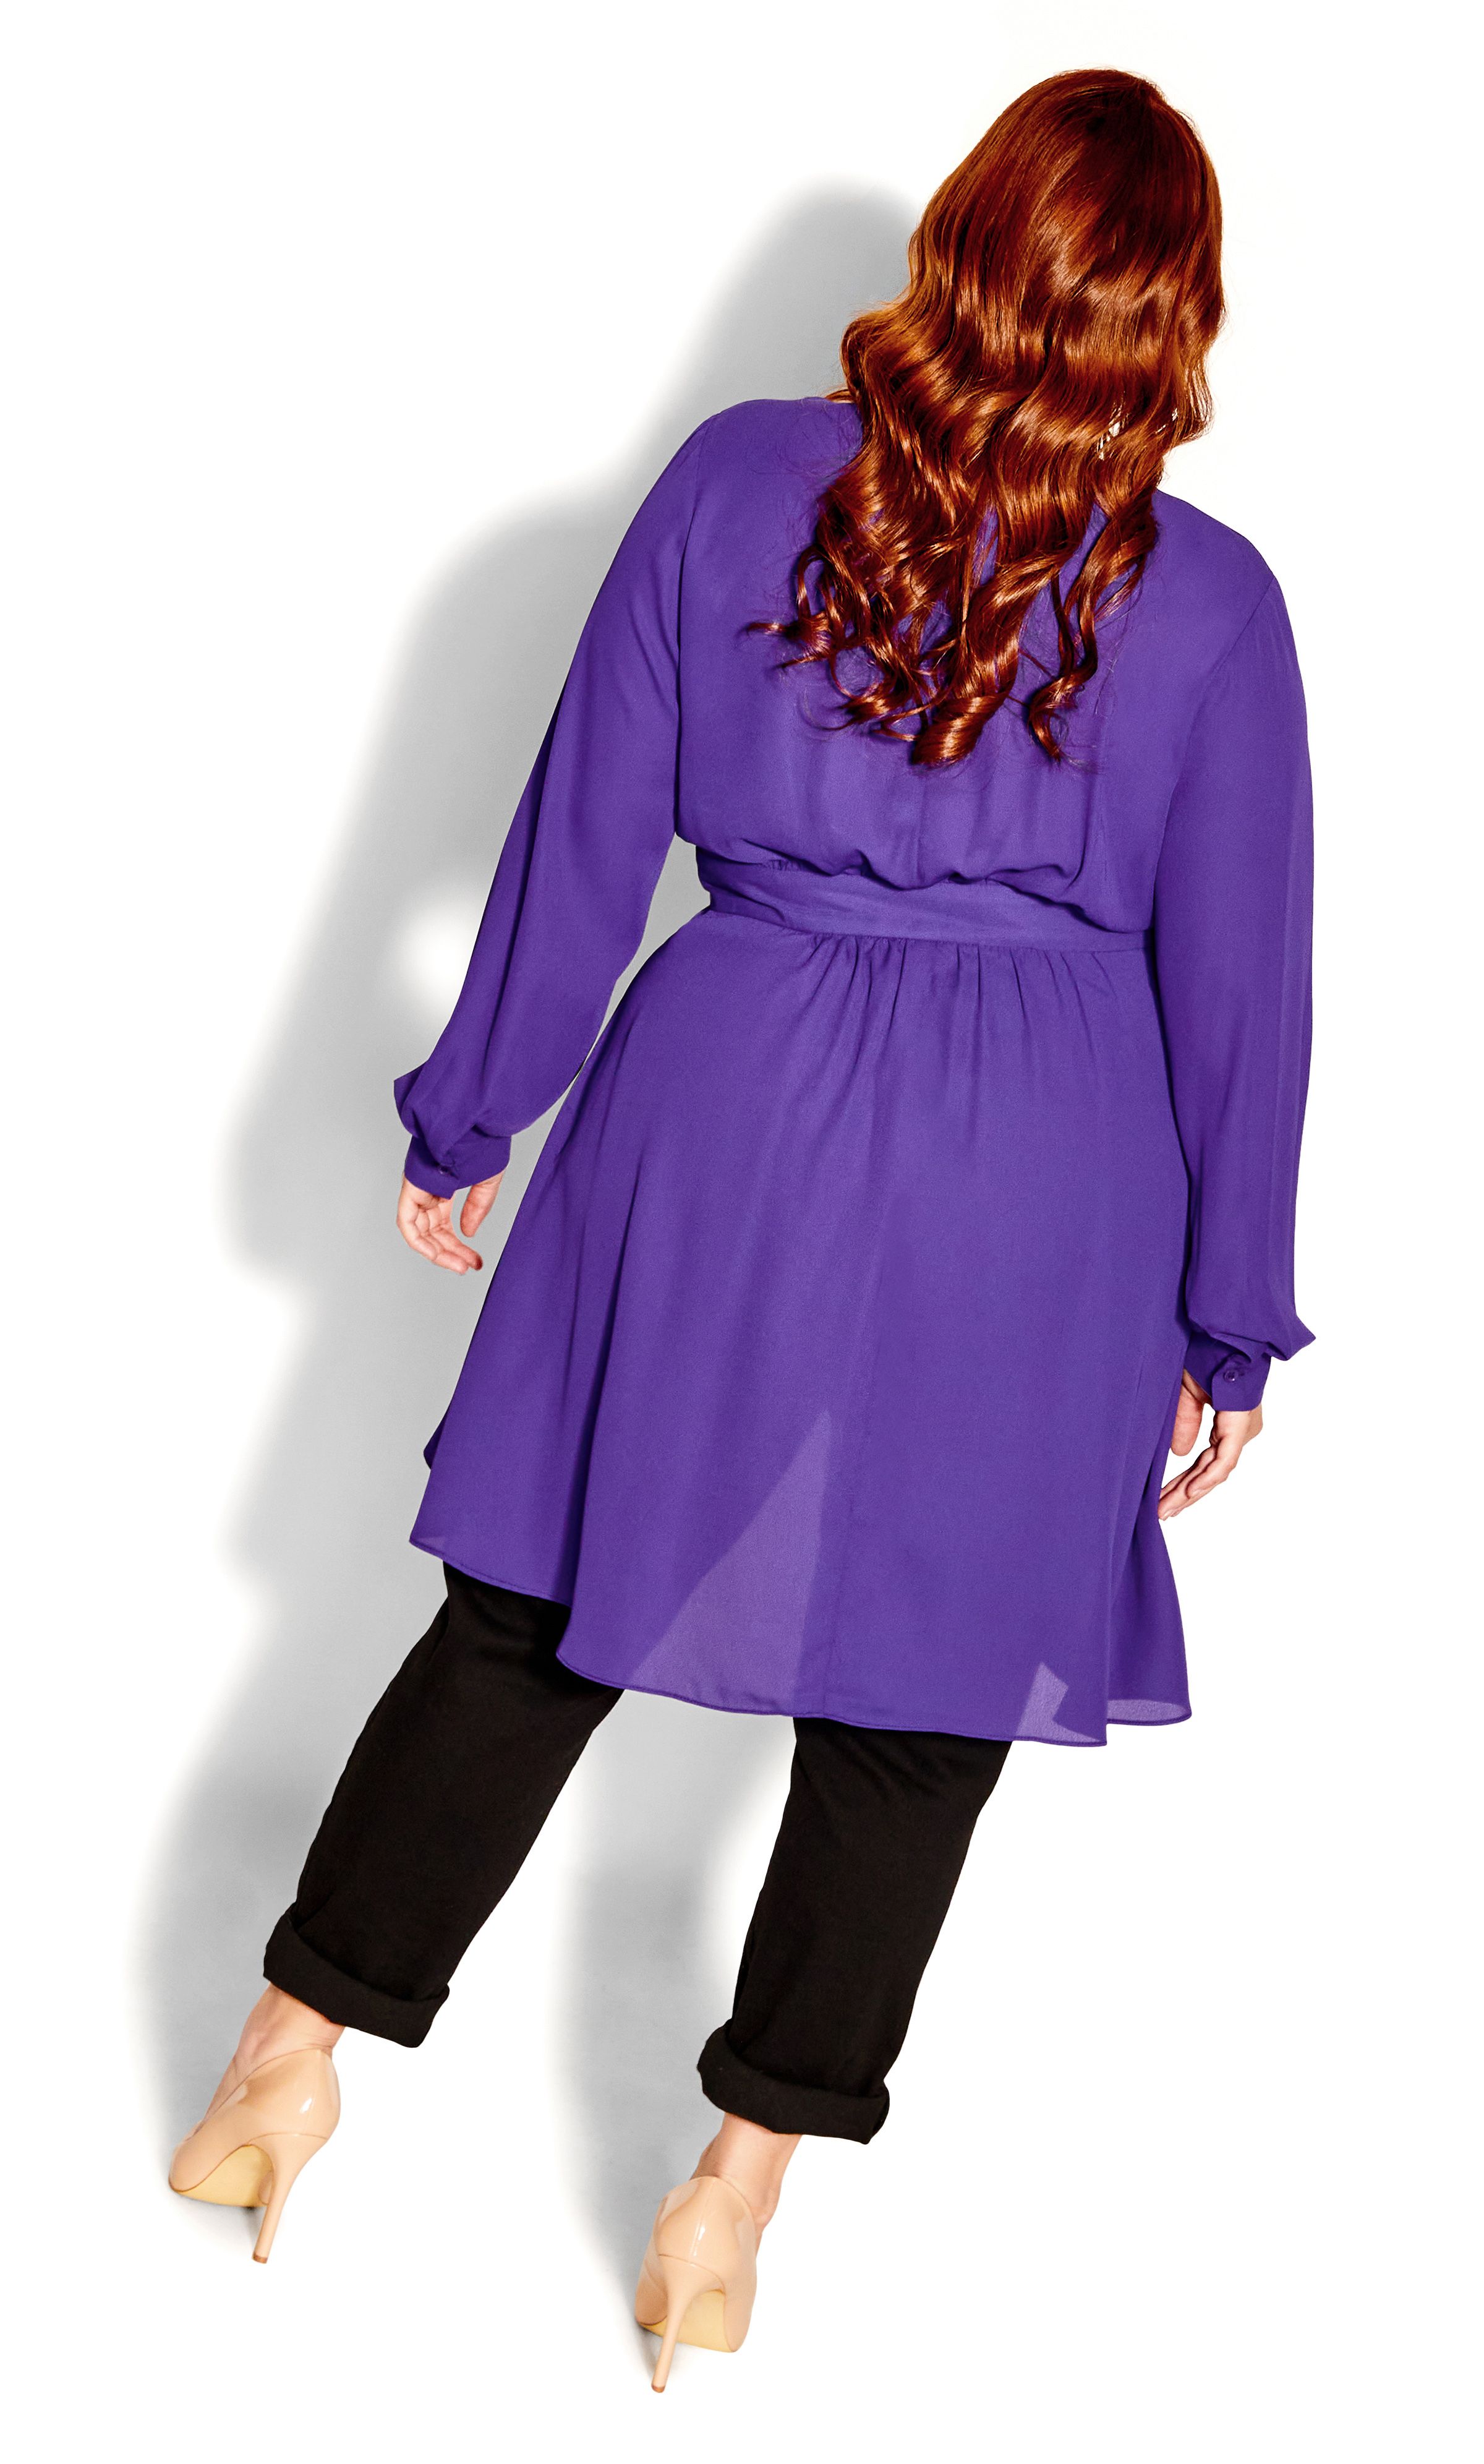 Turn up the drama in the fabulous staple CC style, the Shibara Top. Now in an enchanting purple hue, this classic draped top is designed to fit and flatter your curves to absolute perfection! Key Features Include: - Deep V-neckline - Long sleeves with button cuff - Single button & loop centre front fastening - Self-tie waist detail - Centre front drape feature - Hi-lo hemline Rock this show-stopping top with glamourous statement jewellery and a mule heel for an elegant touch.